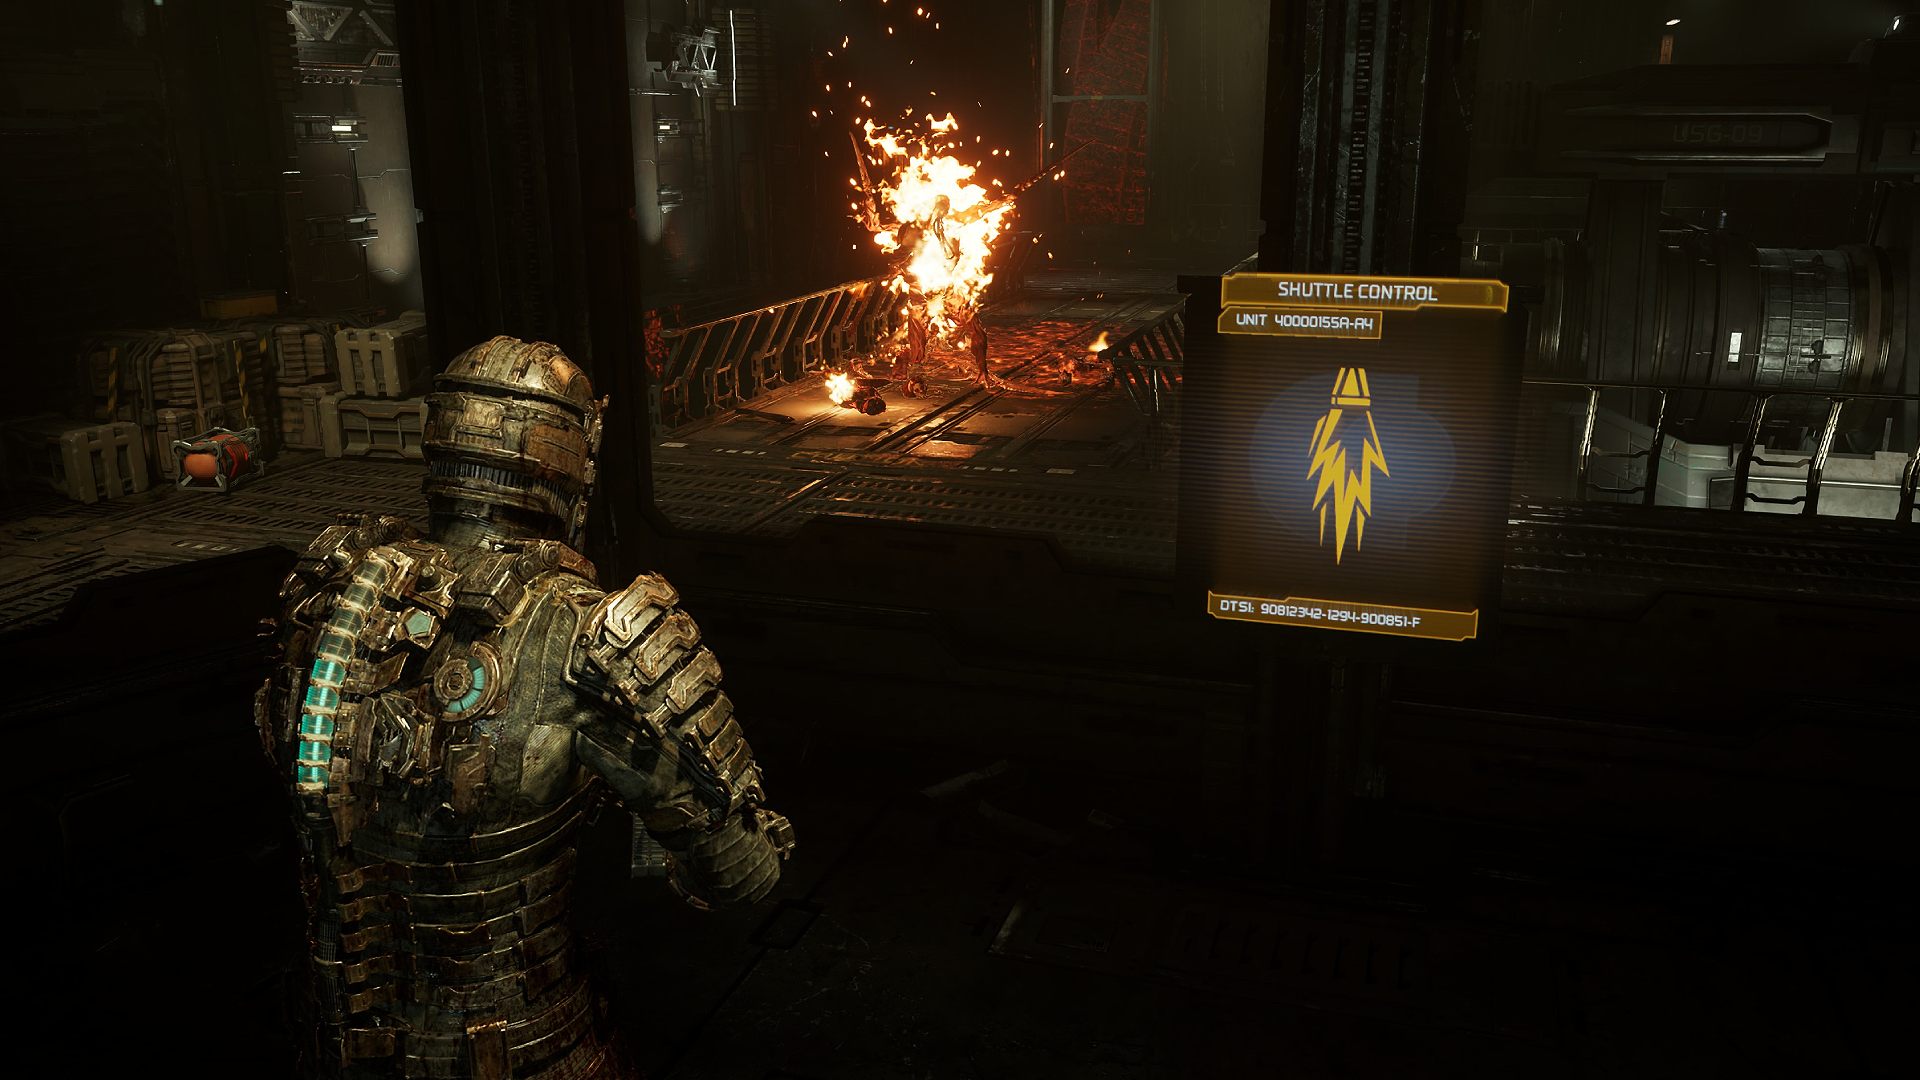 Best setting for Dead Space Remake: Isaac Clarke watching a necromorph burn through a window